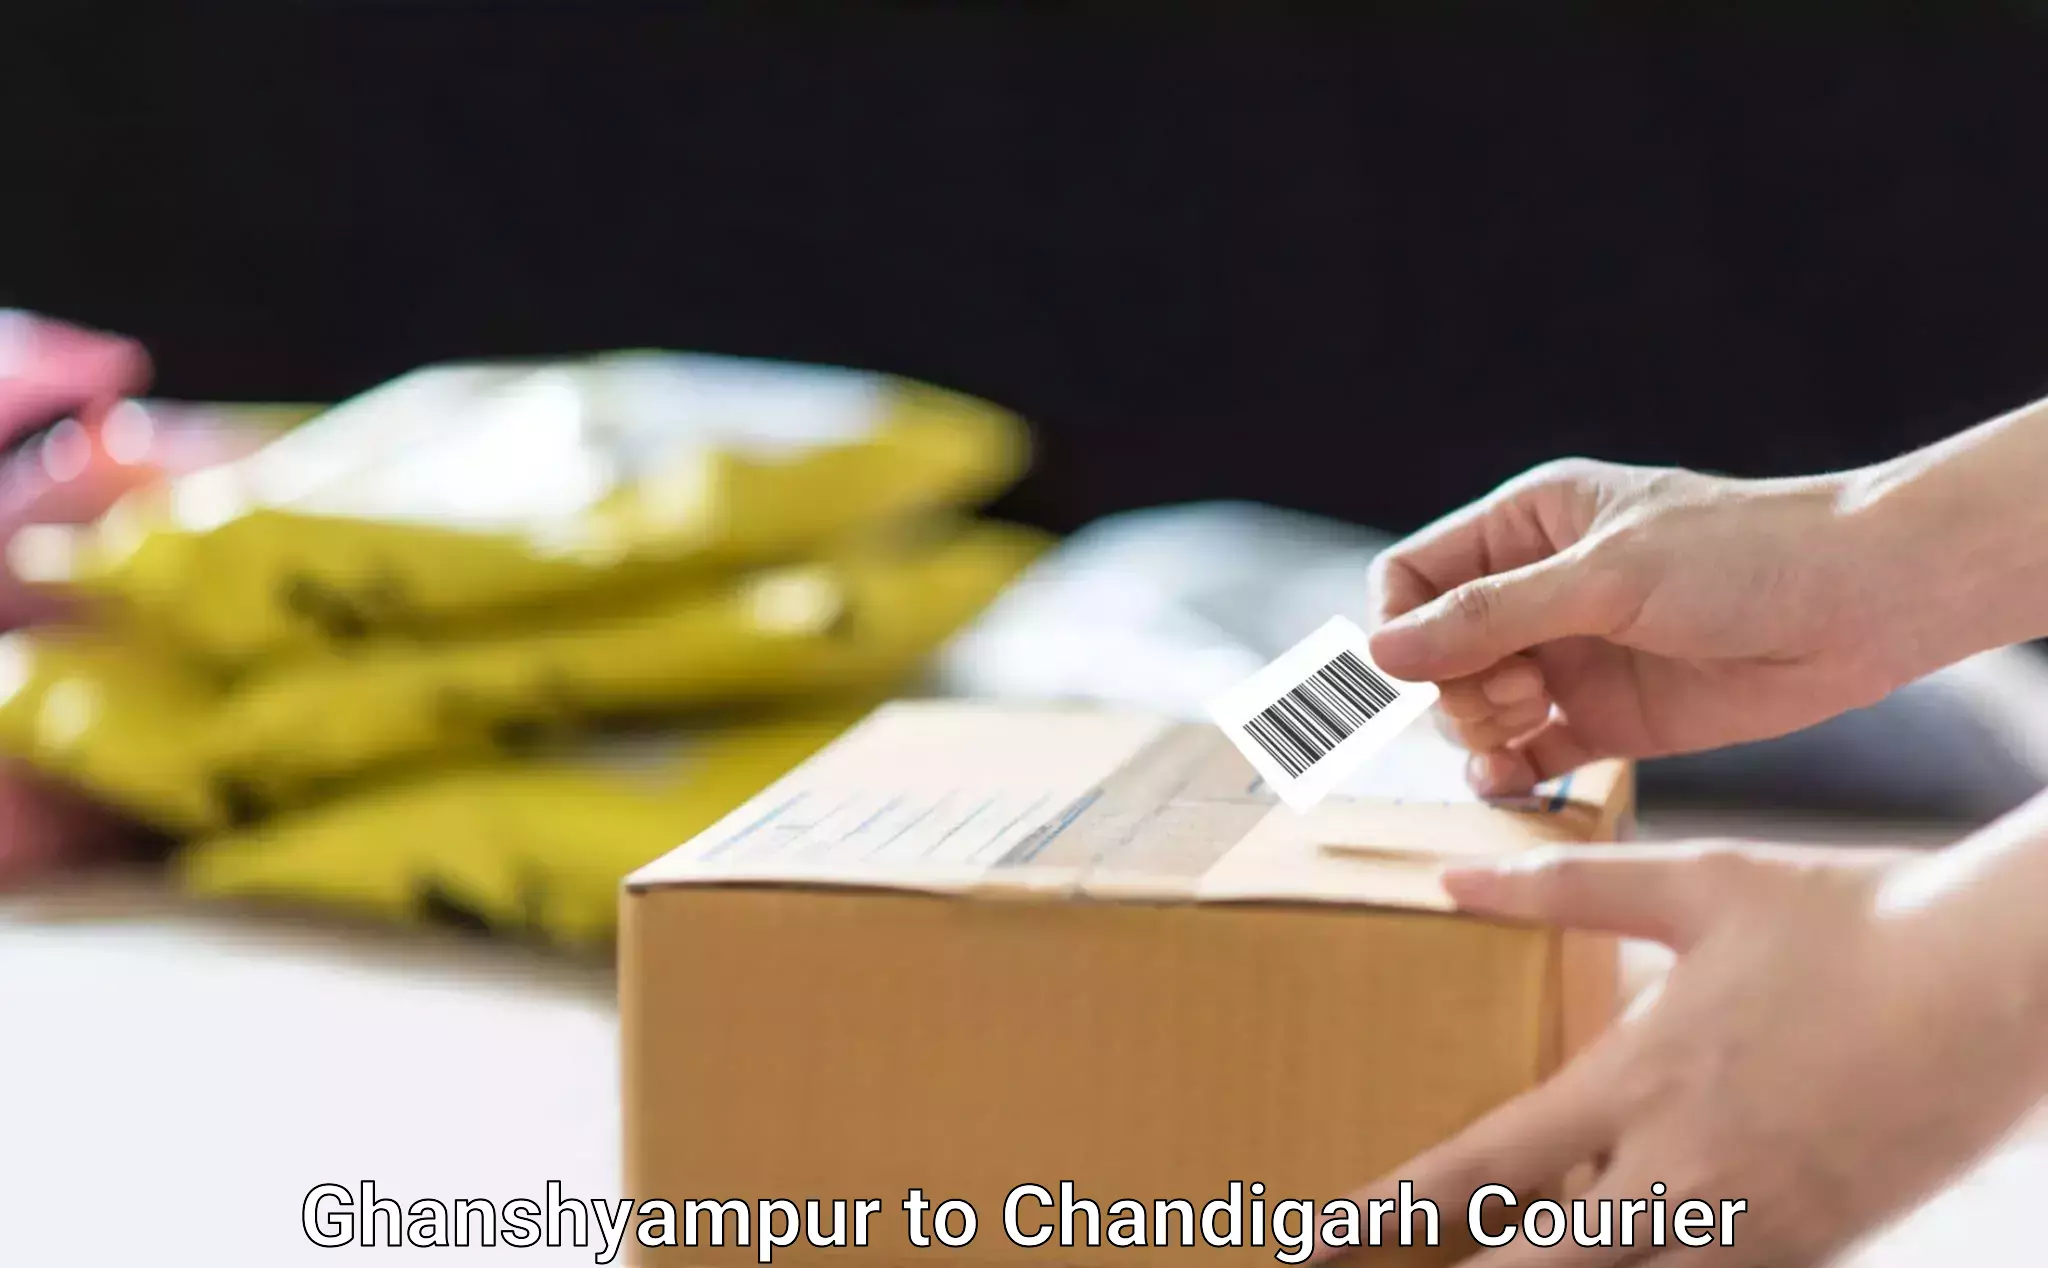 Budget-friendly movers Ghanshyampur to Chandigarh